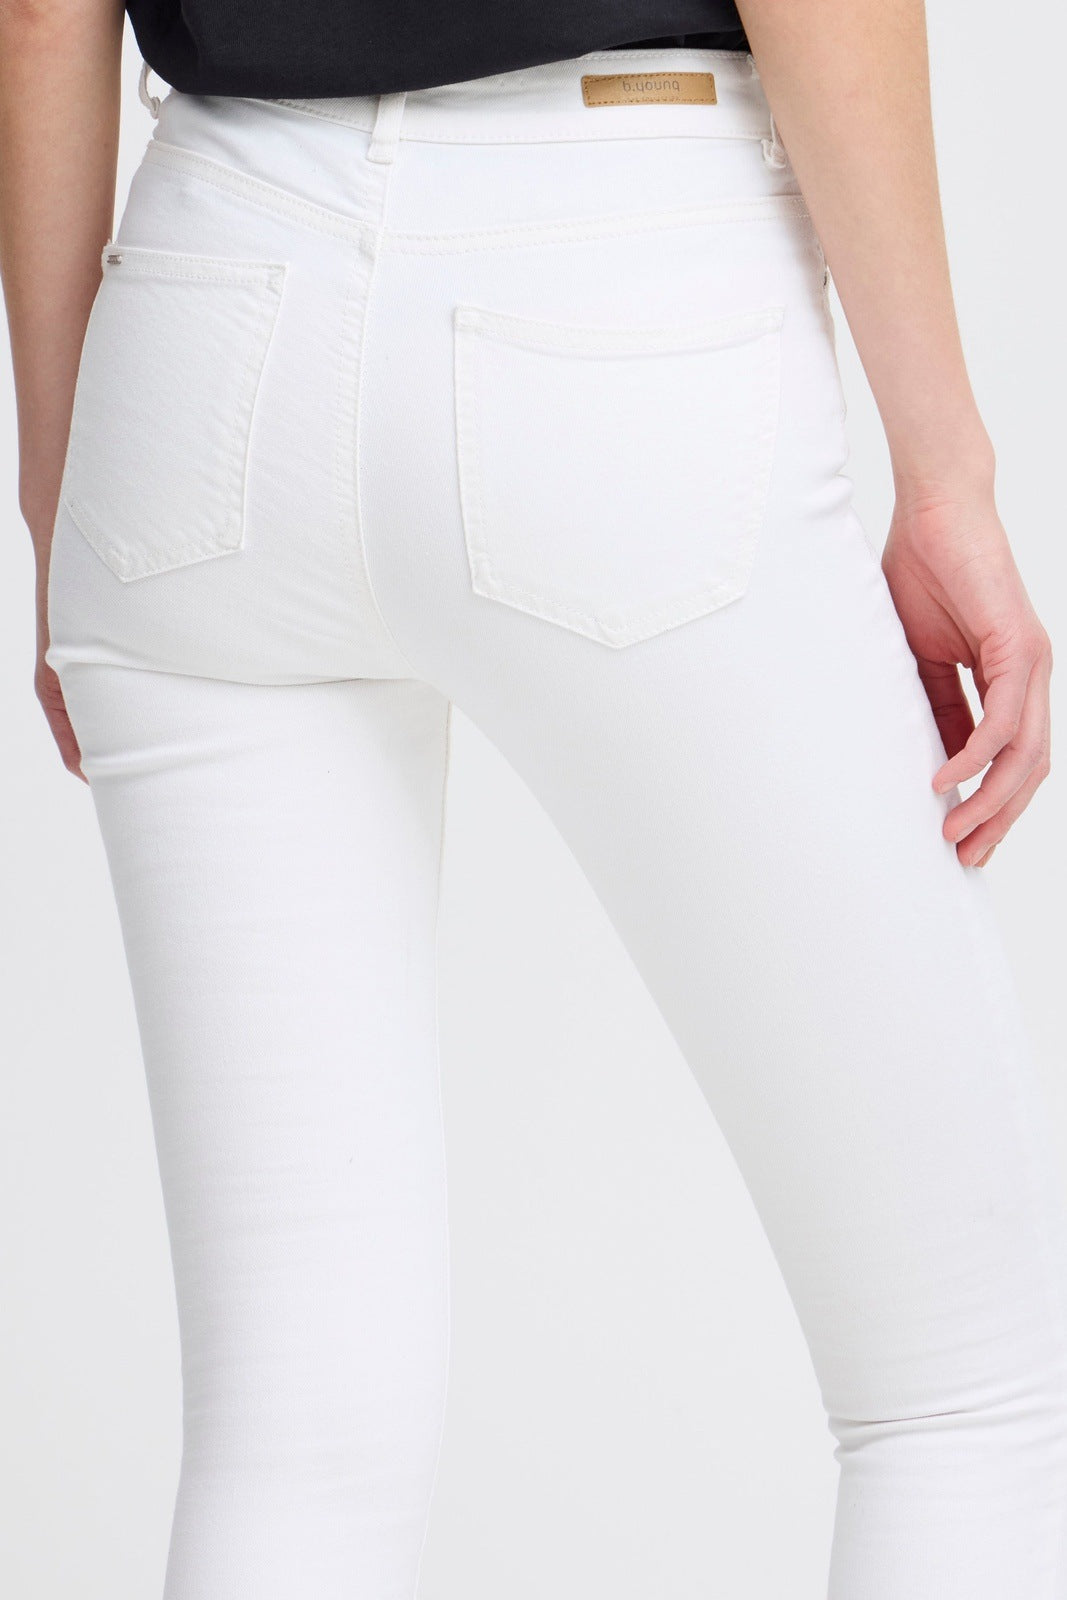 B.young Denim Jeans - White 3 Shaws Department Stores